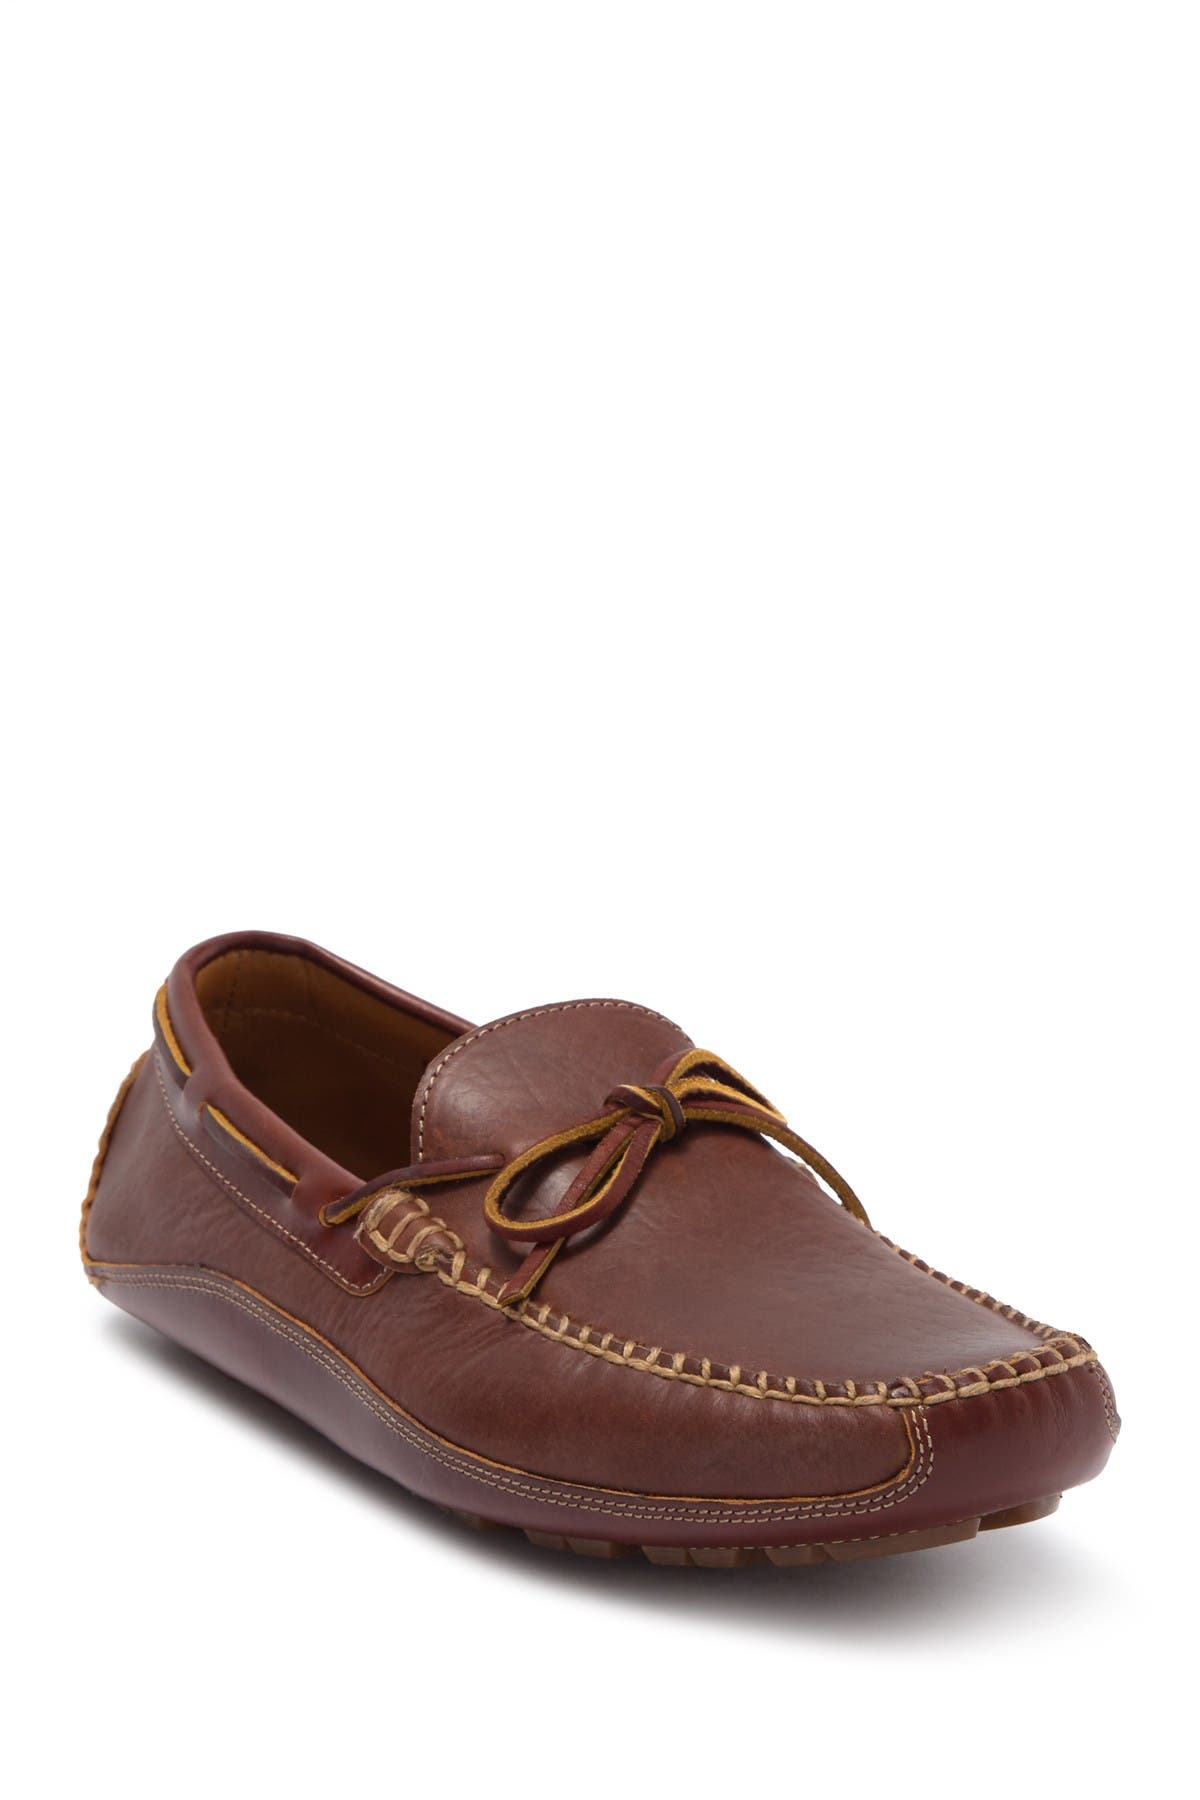 trask drake leather driving shoe